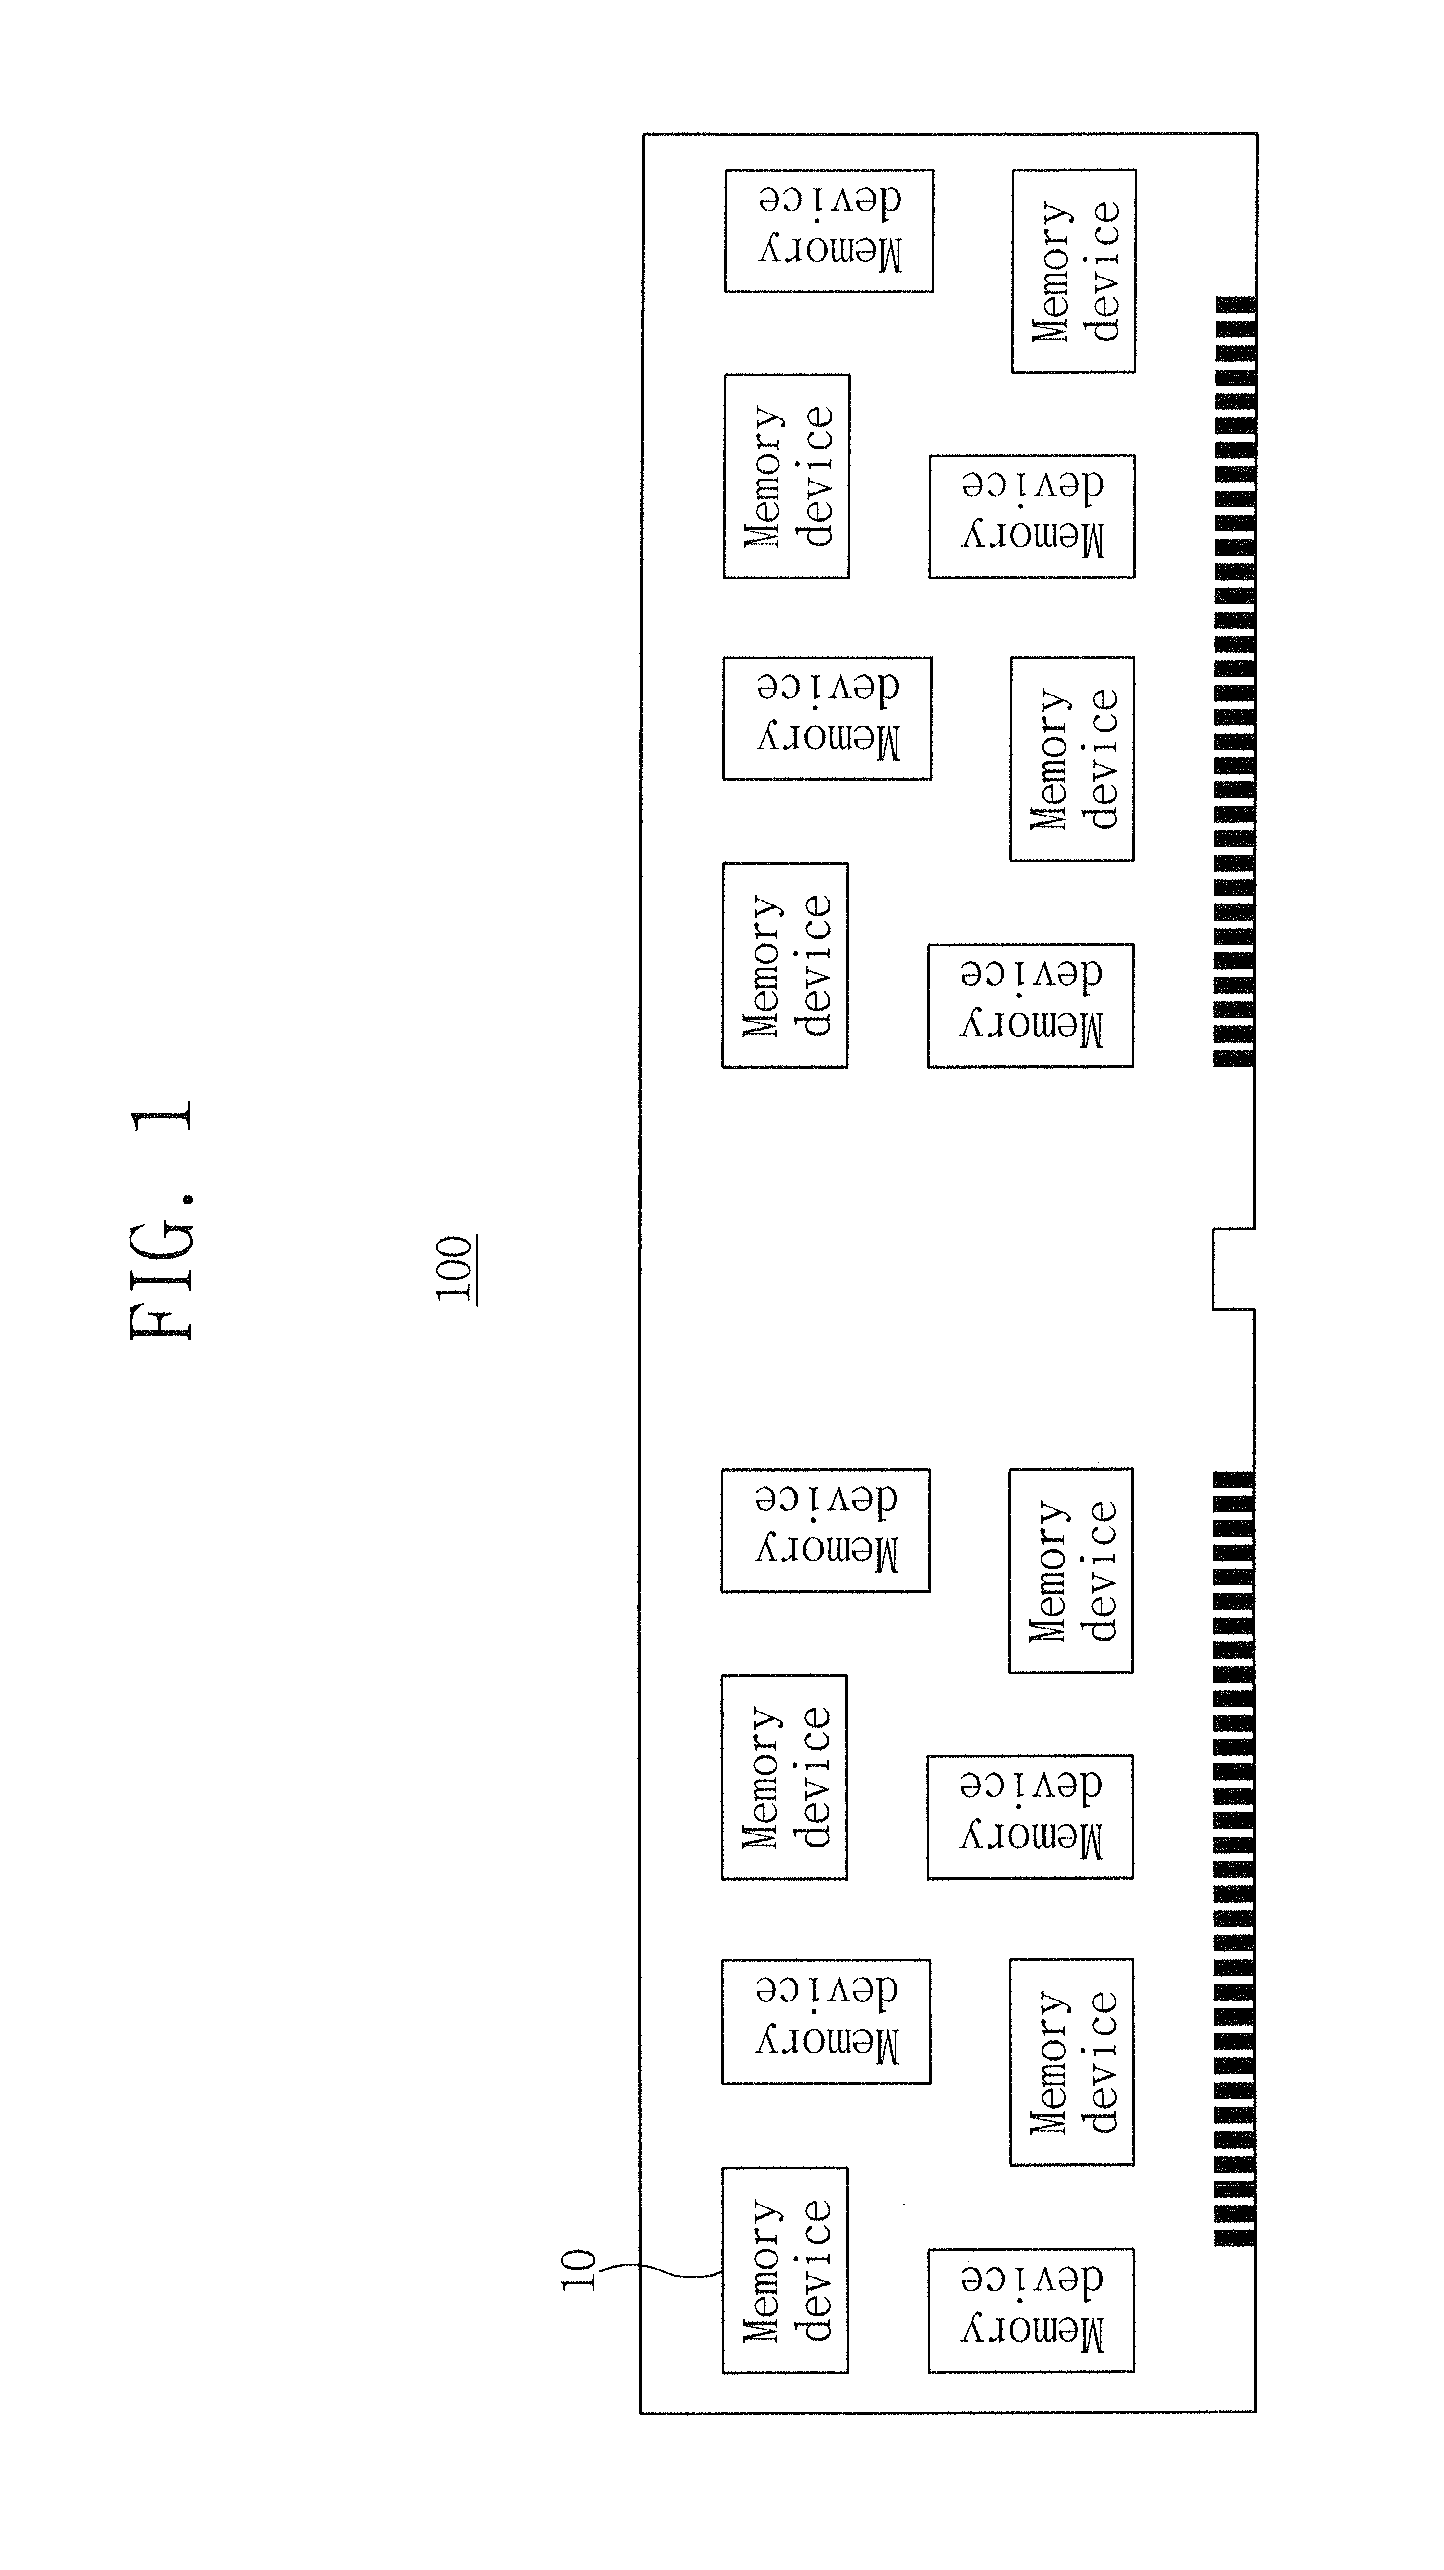 Memory device and a memory module having the same